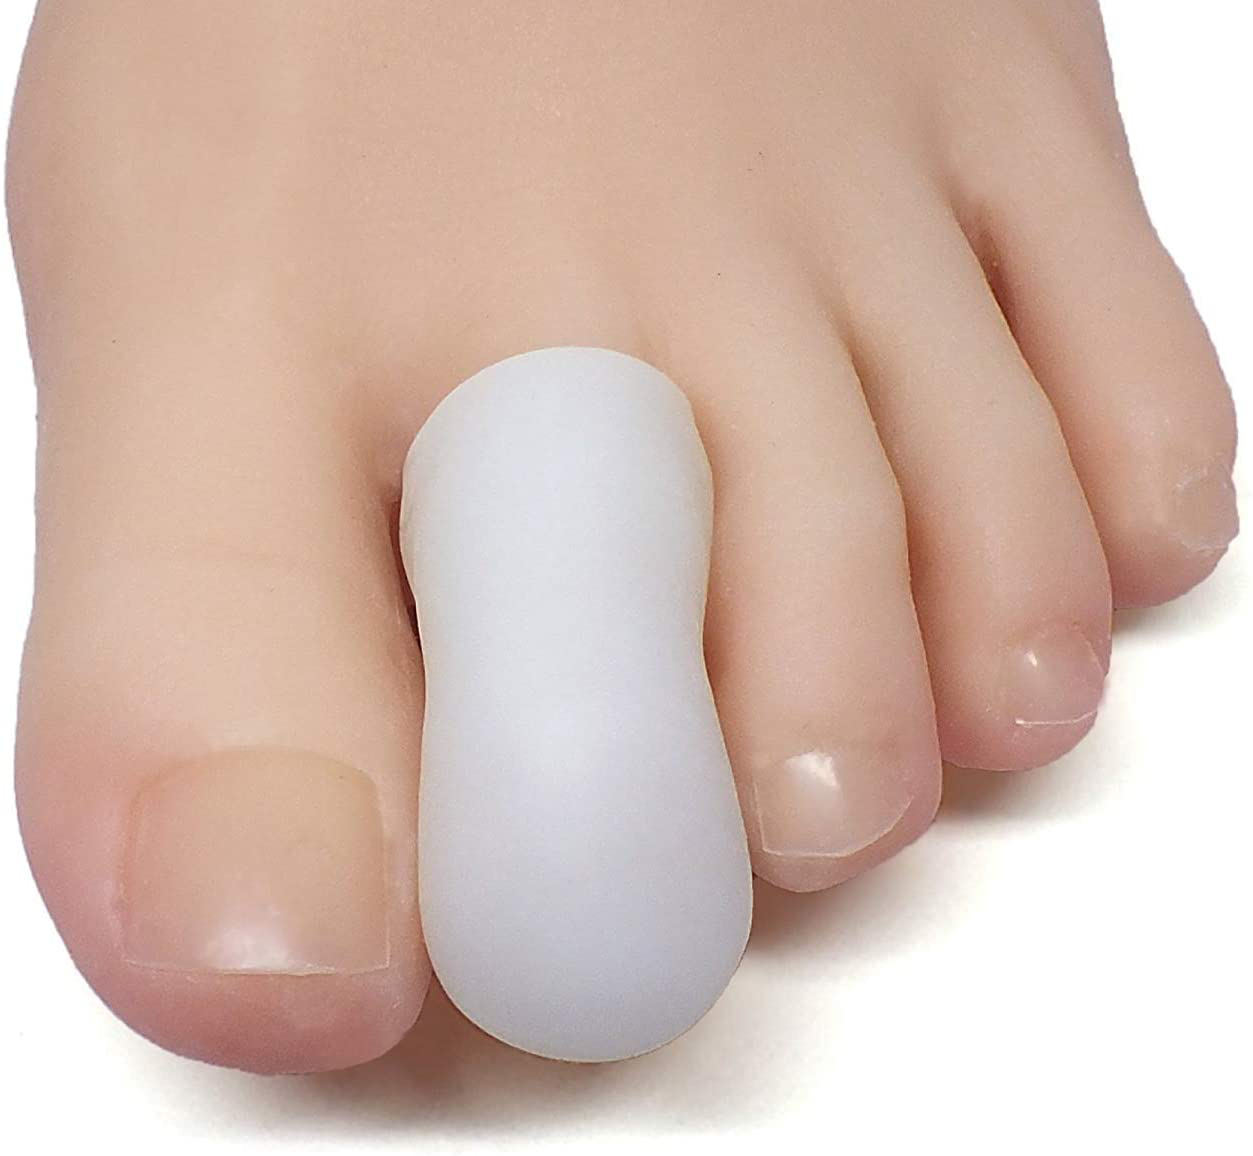 Zentoes 6 Pack Gel Toe Cap and Protector - Cushions and Protects to Provide Relief from Missing or Ingrown Toenails, Corns, Blisters, Hammer Toes (Small, White)